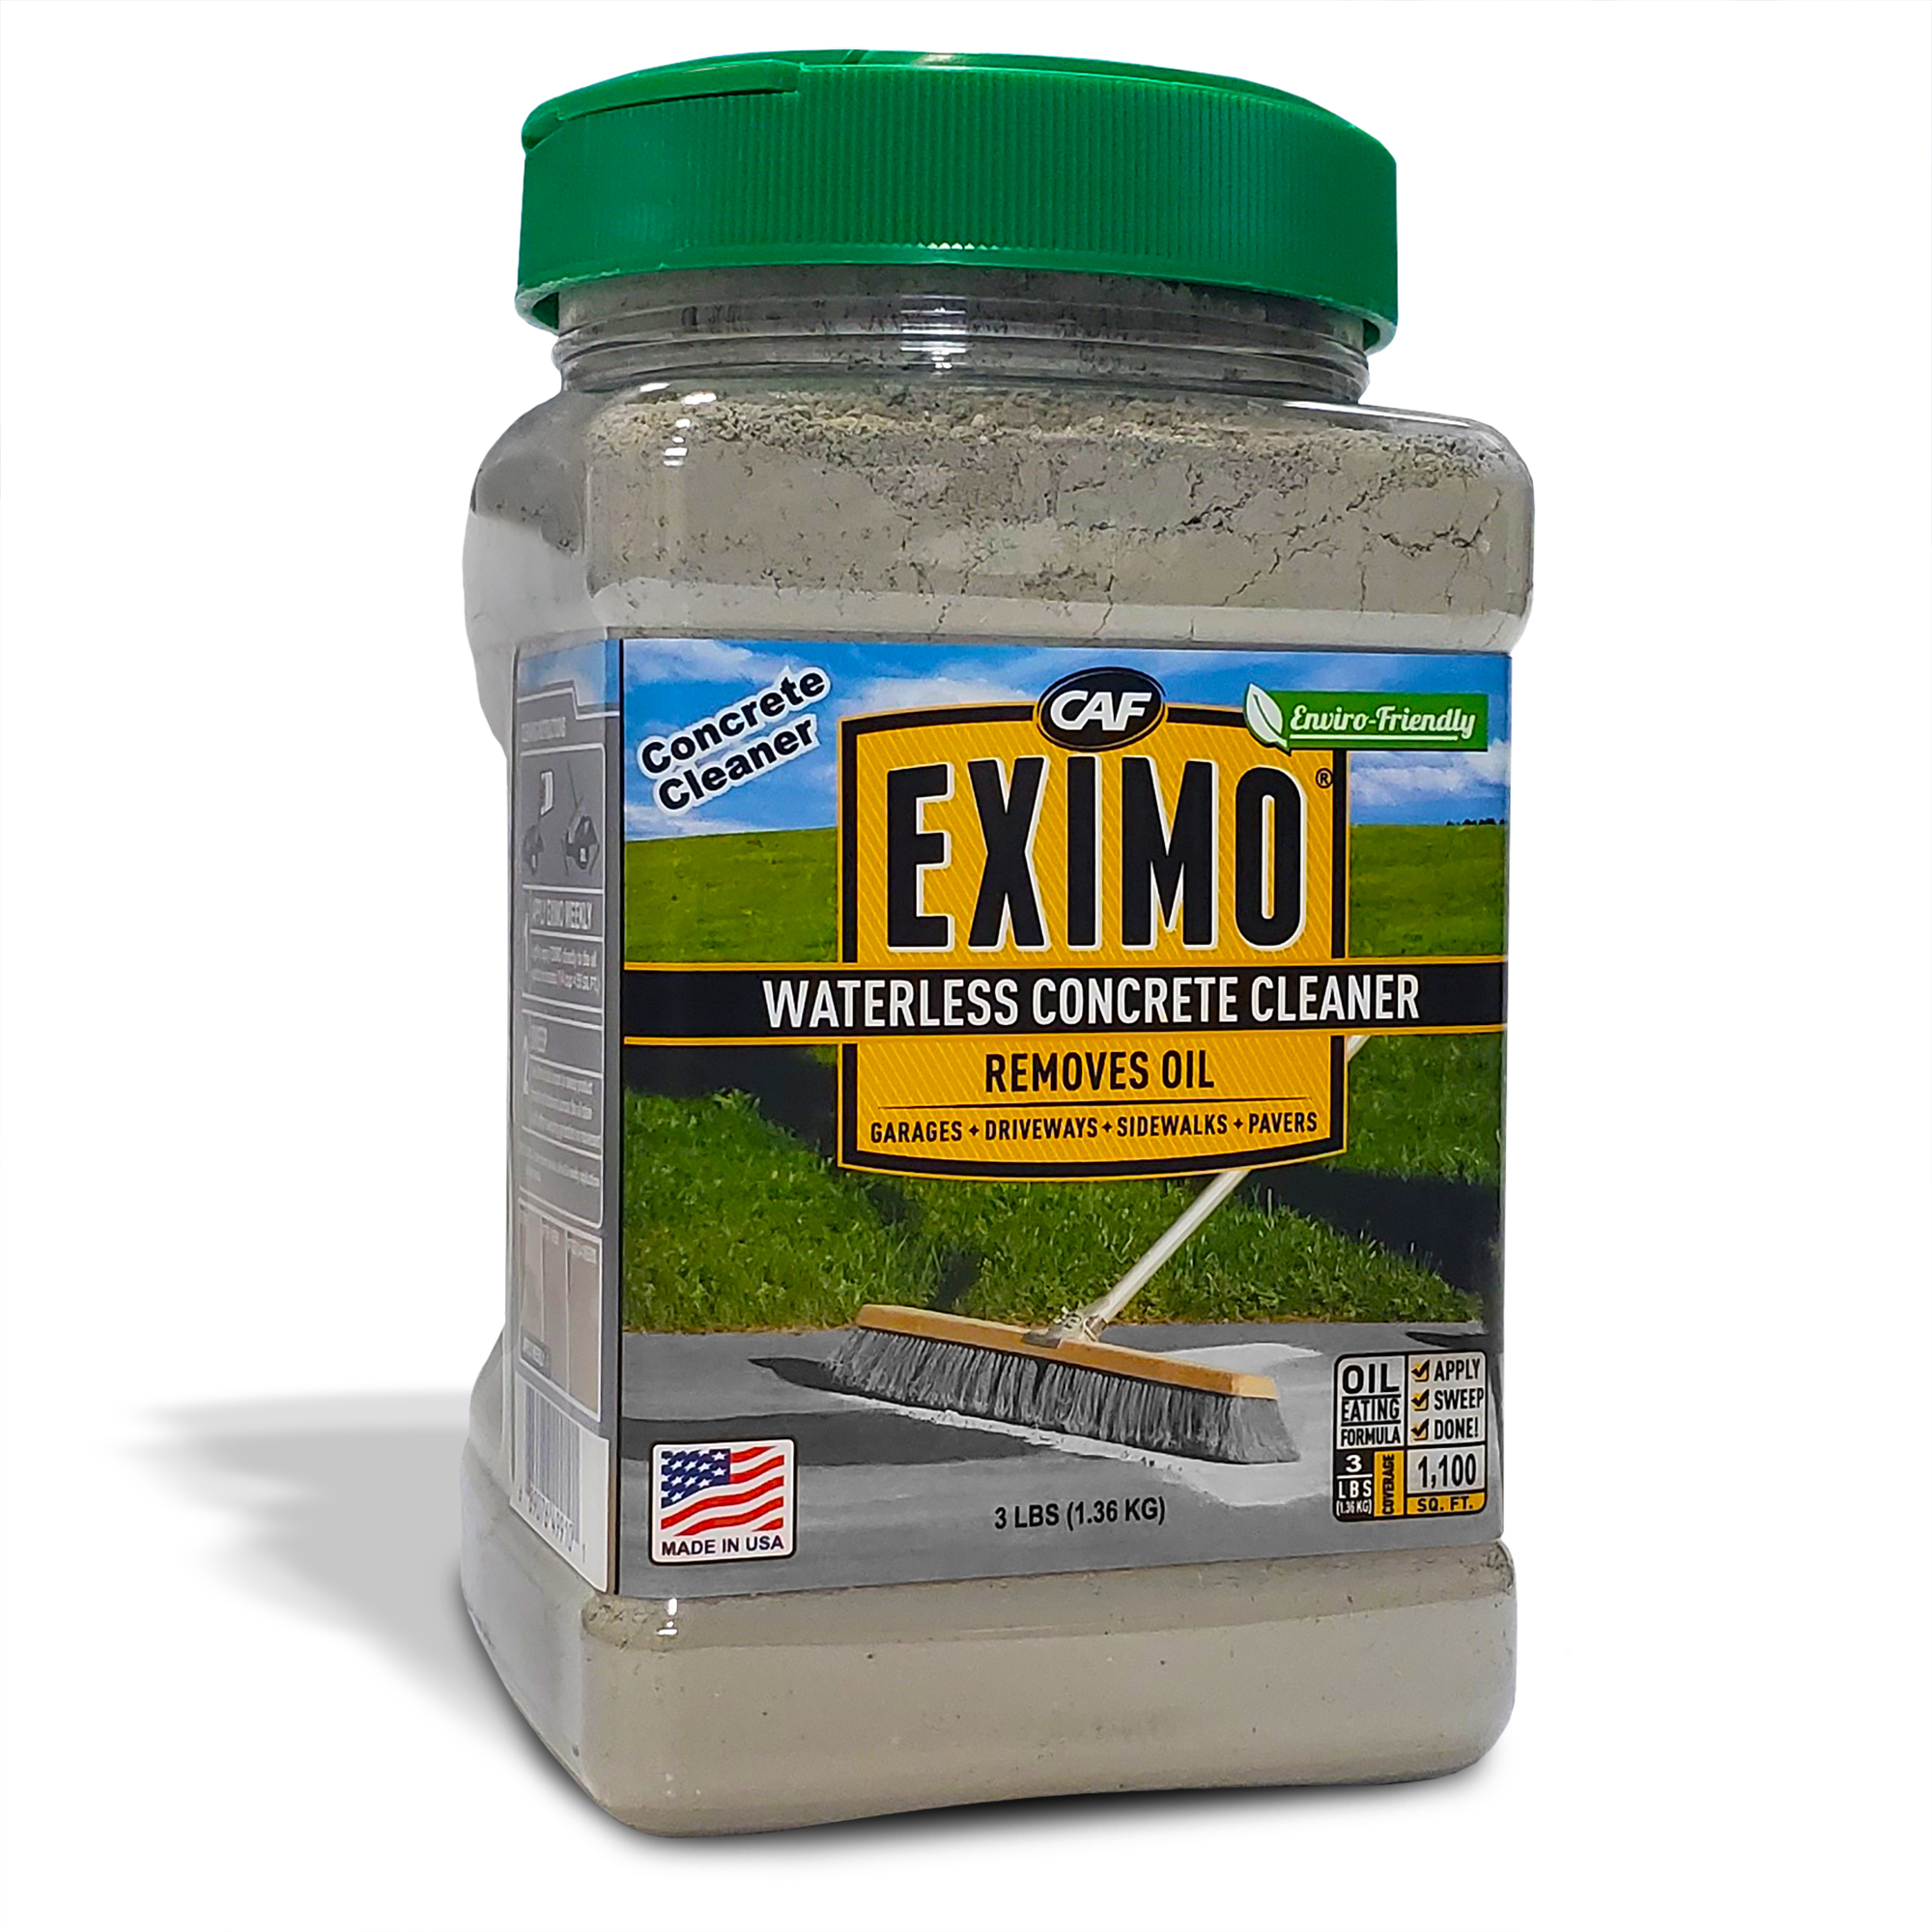 EXIMO Waterless Concrete Cleaner by CAF Outdoor Cleaning for Driveway, Garage, Basement, and Walkway Surfaces, 3 lbs, Advanced Stain Remover for Oils and Other Petroleum Stains - image 1 of 8